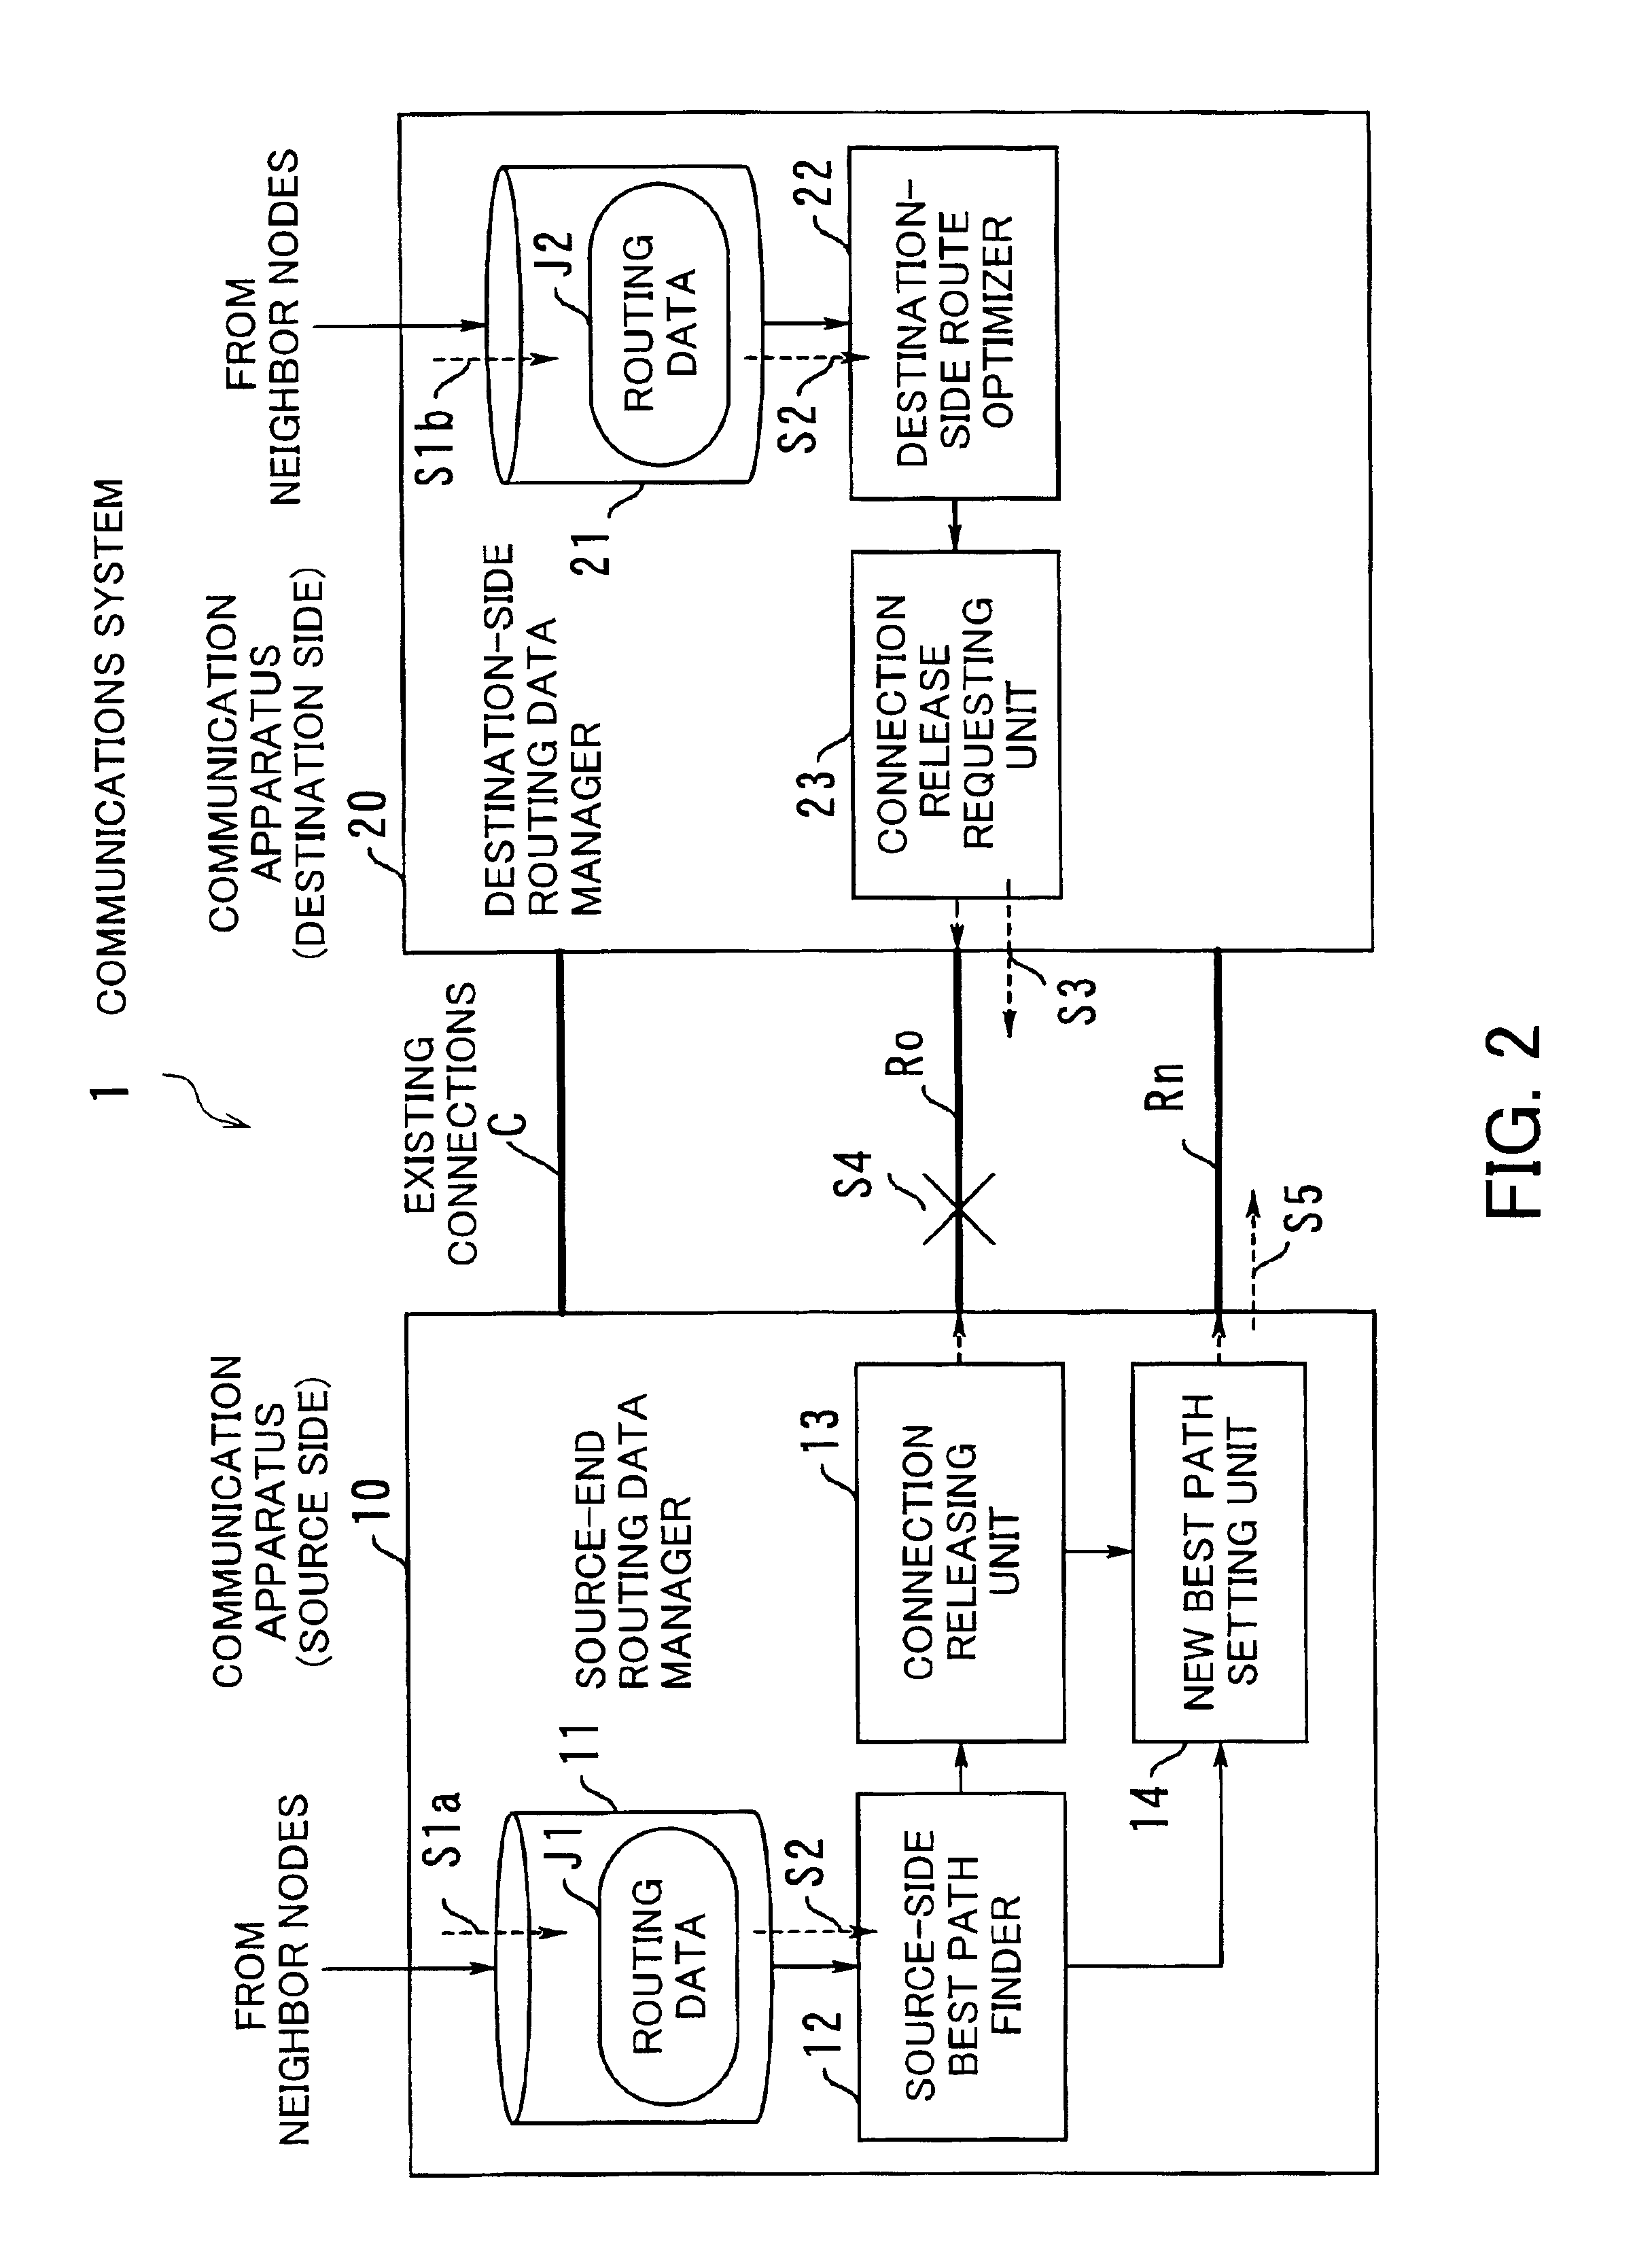 Communication apparatus with selective route optimization capabilities